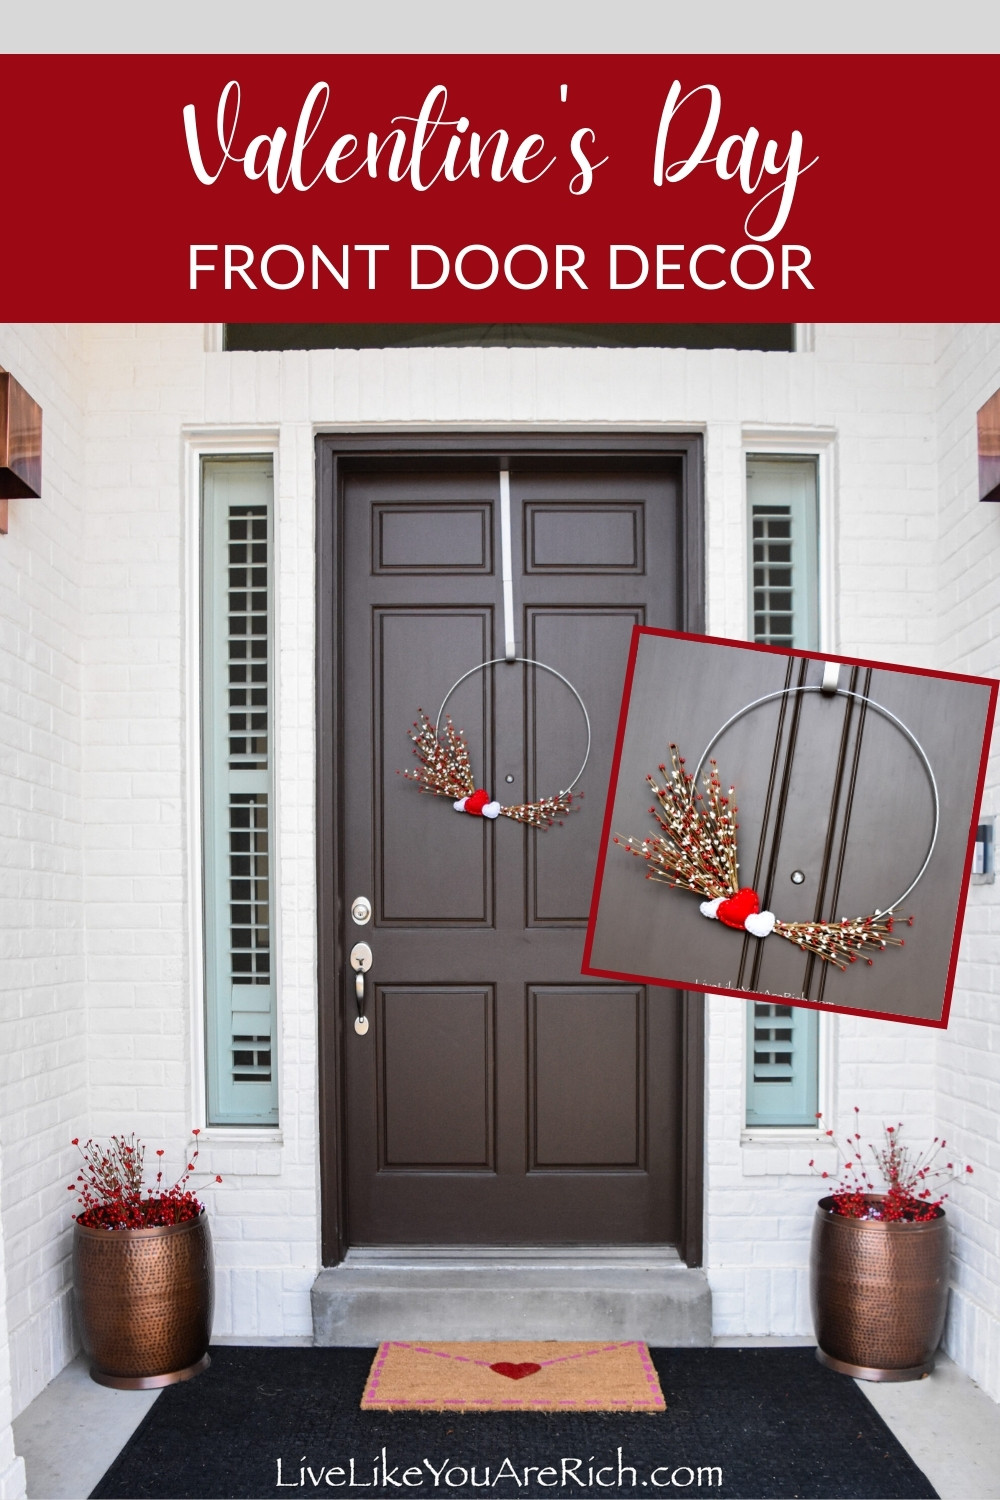 Decorate your front door with this simple Valentine’s Day Front Door Decor. It was very simple to make and only take 15 minutes. Valentines decor, Valentine’s wreath for front door.